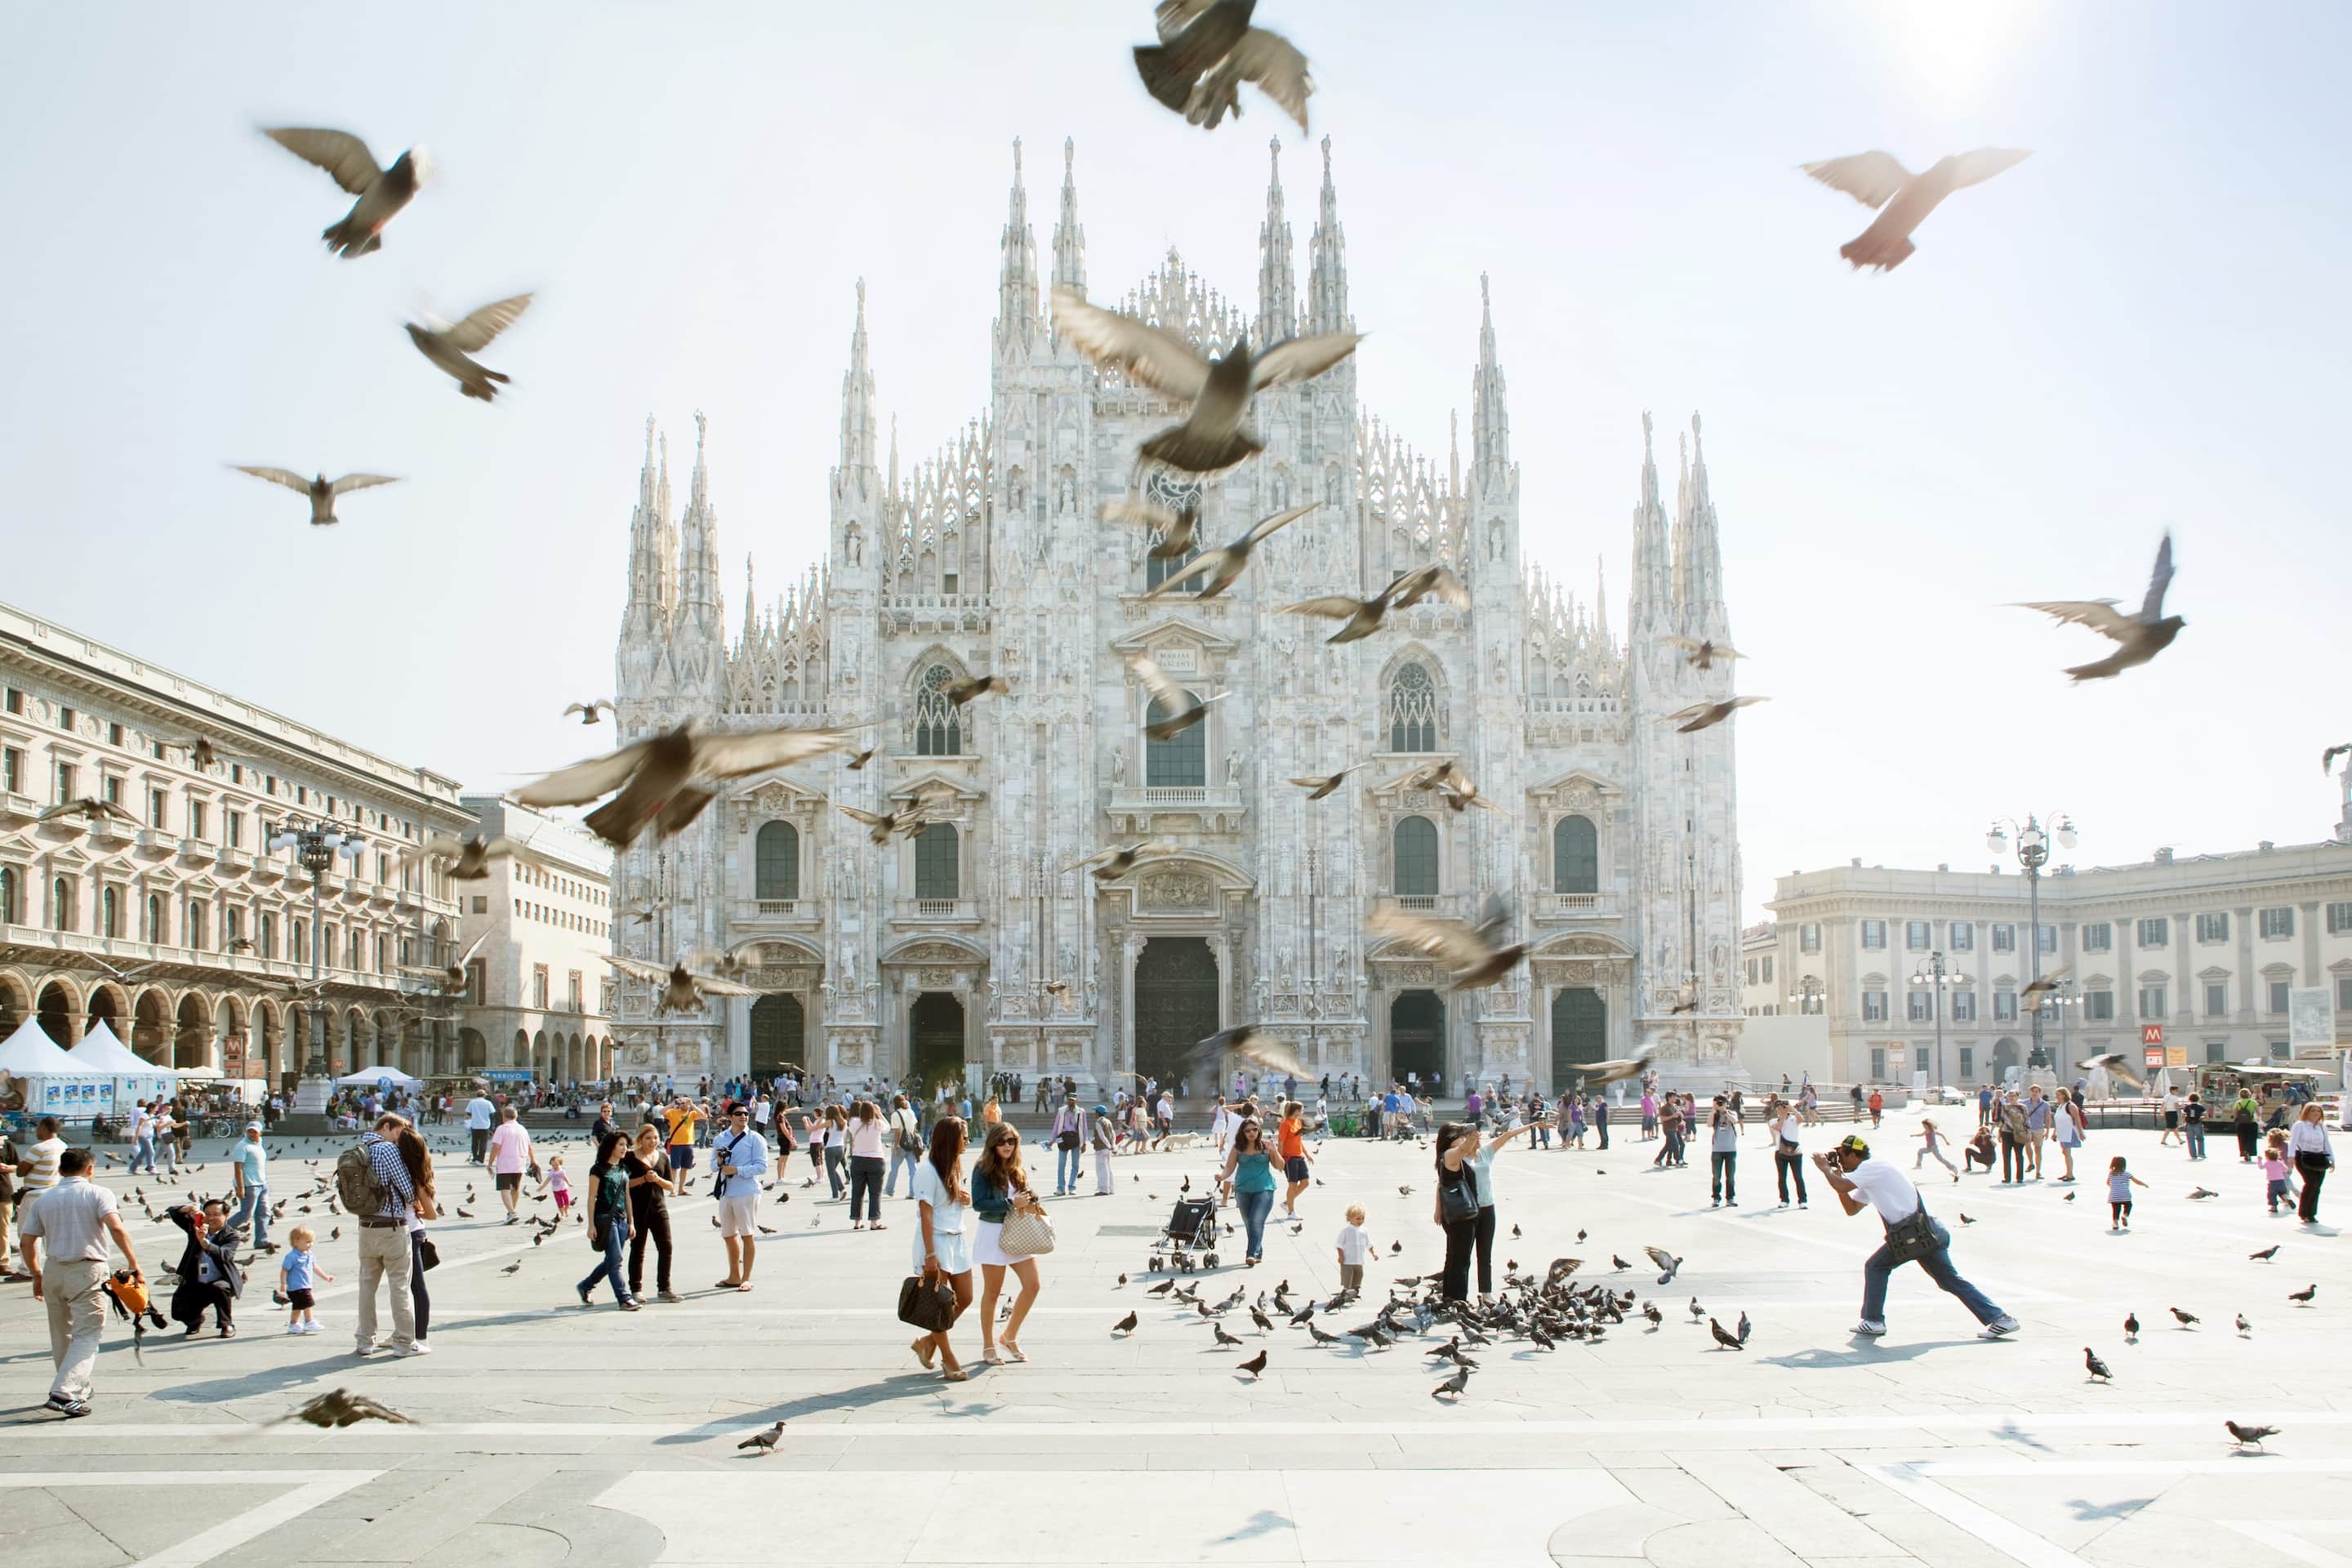 Birds flutter in the air in front of Milan's imposing white-facaded Duomo